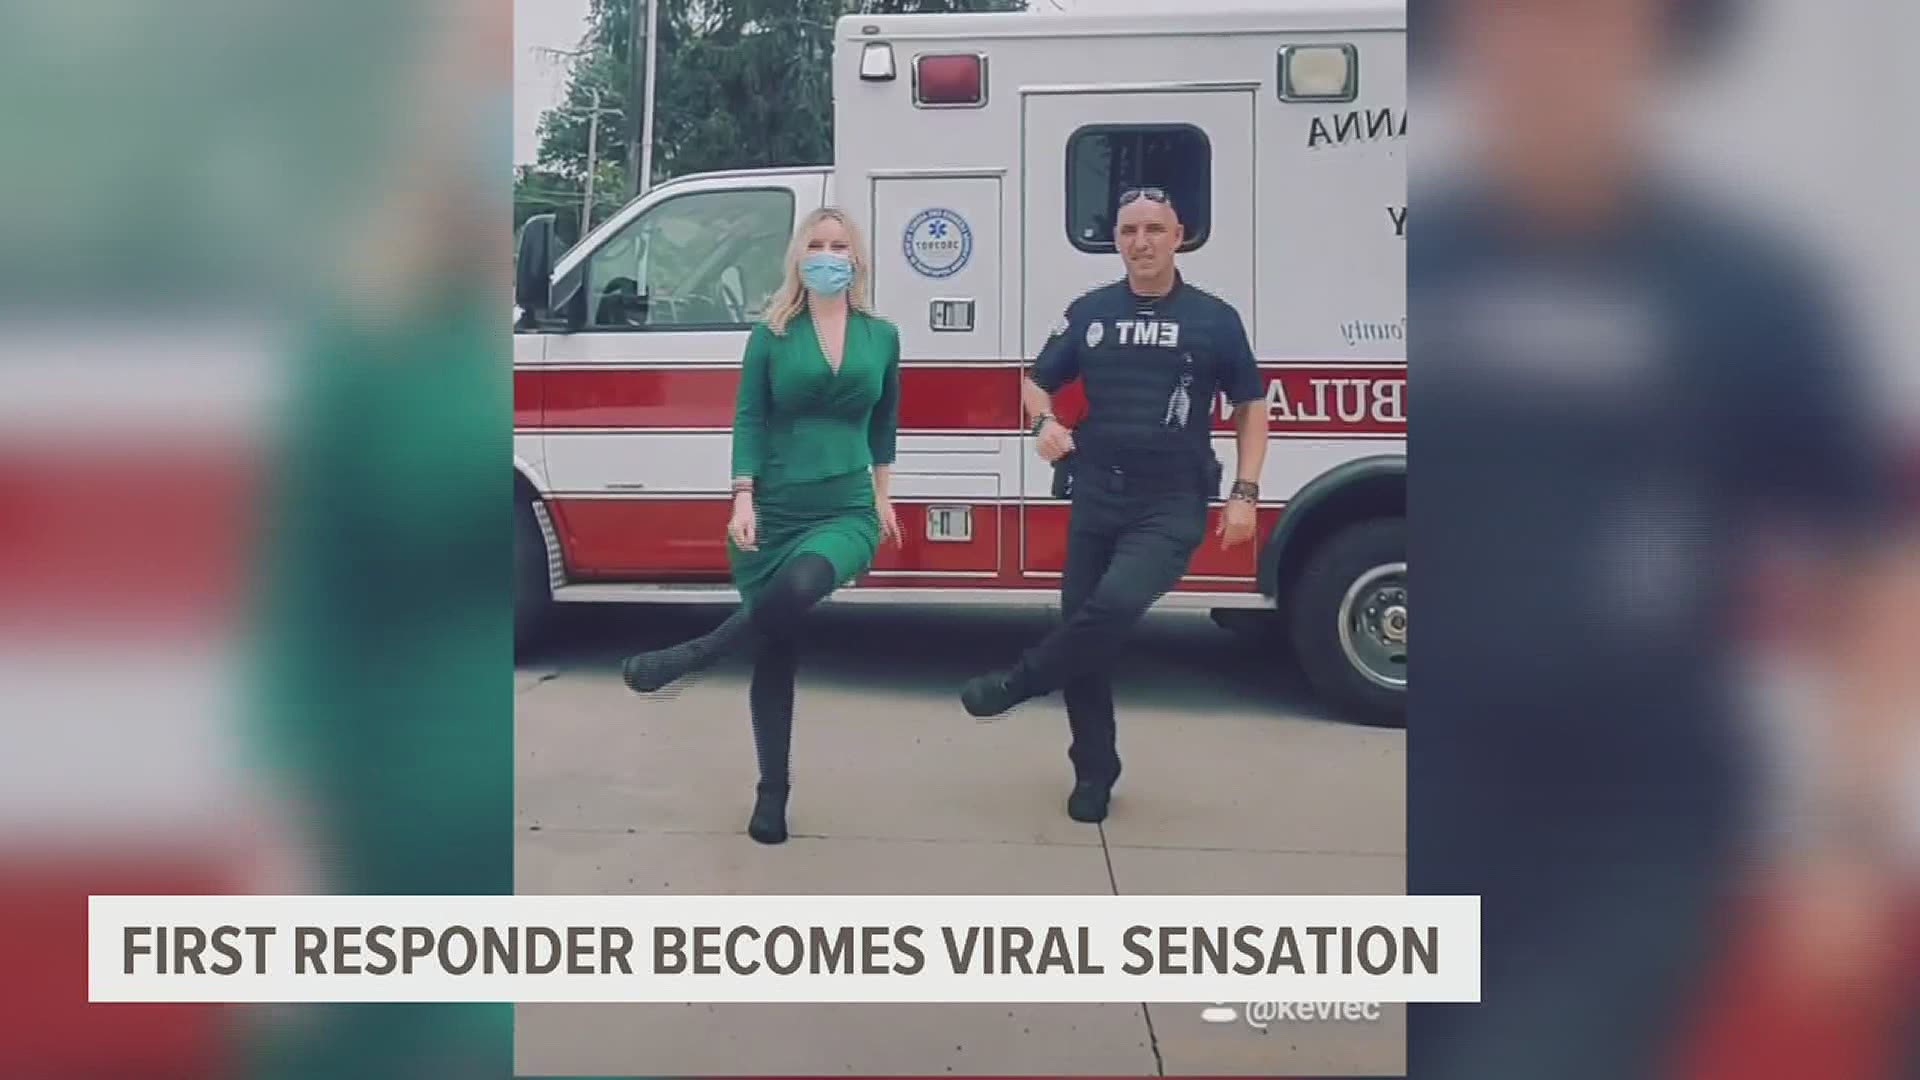 Kevin Cunrod is an EMT, firefighter, and a viral star on TikTok with more than 22,000 followers